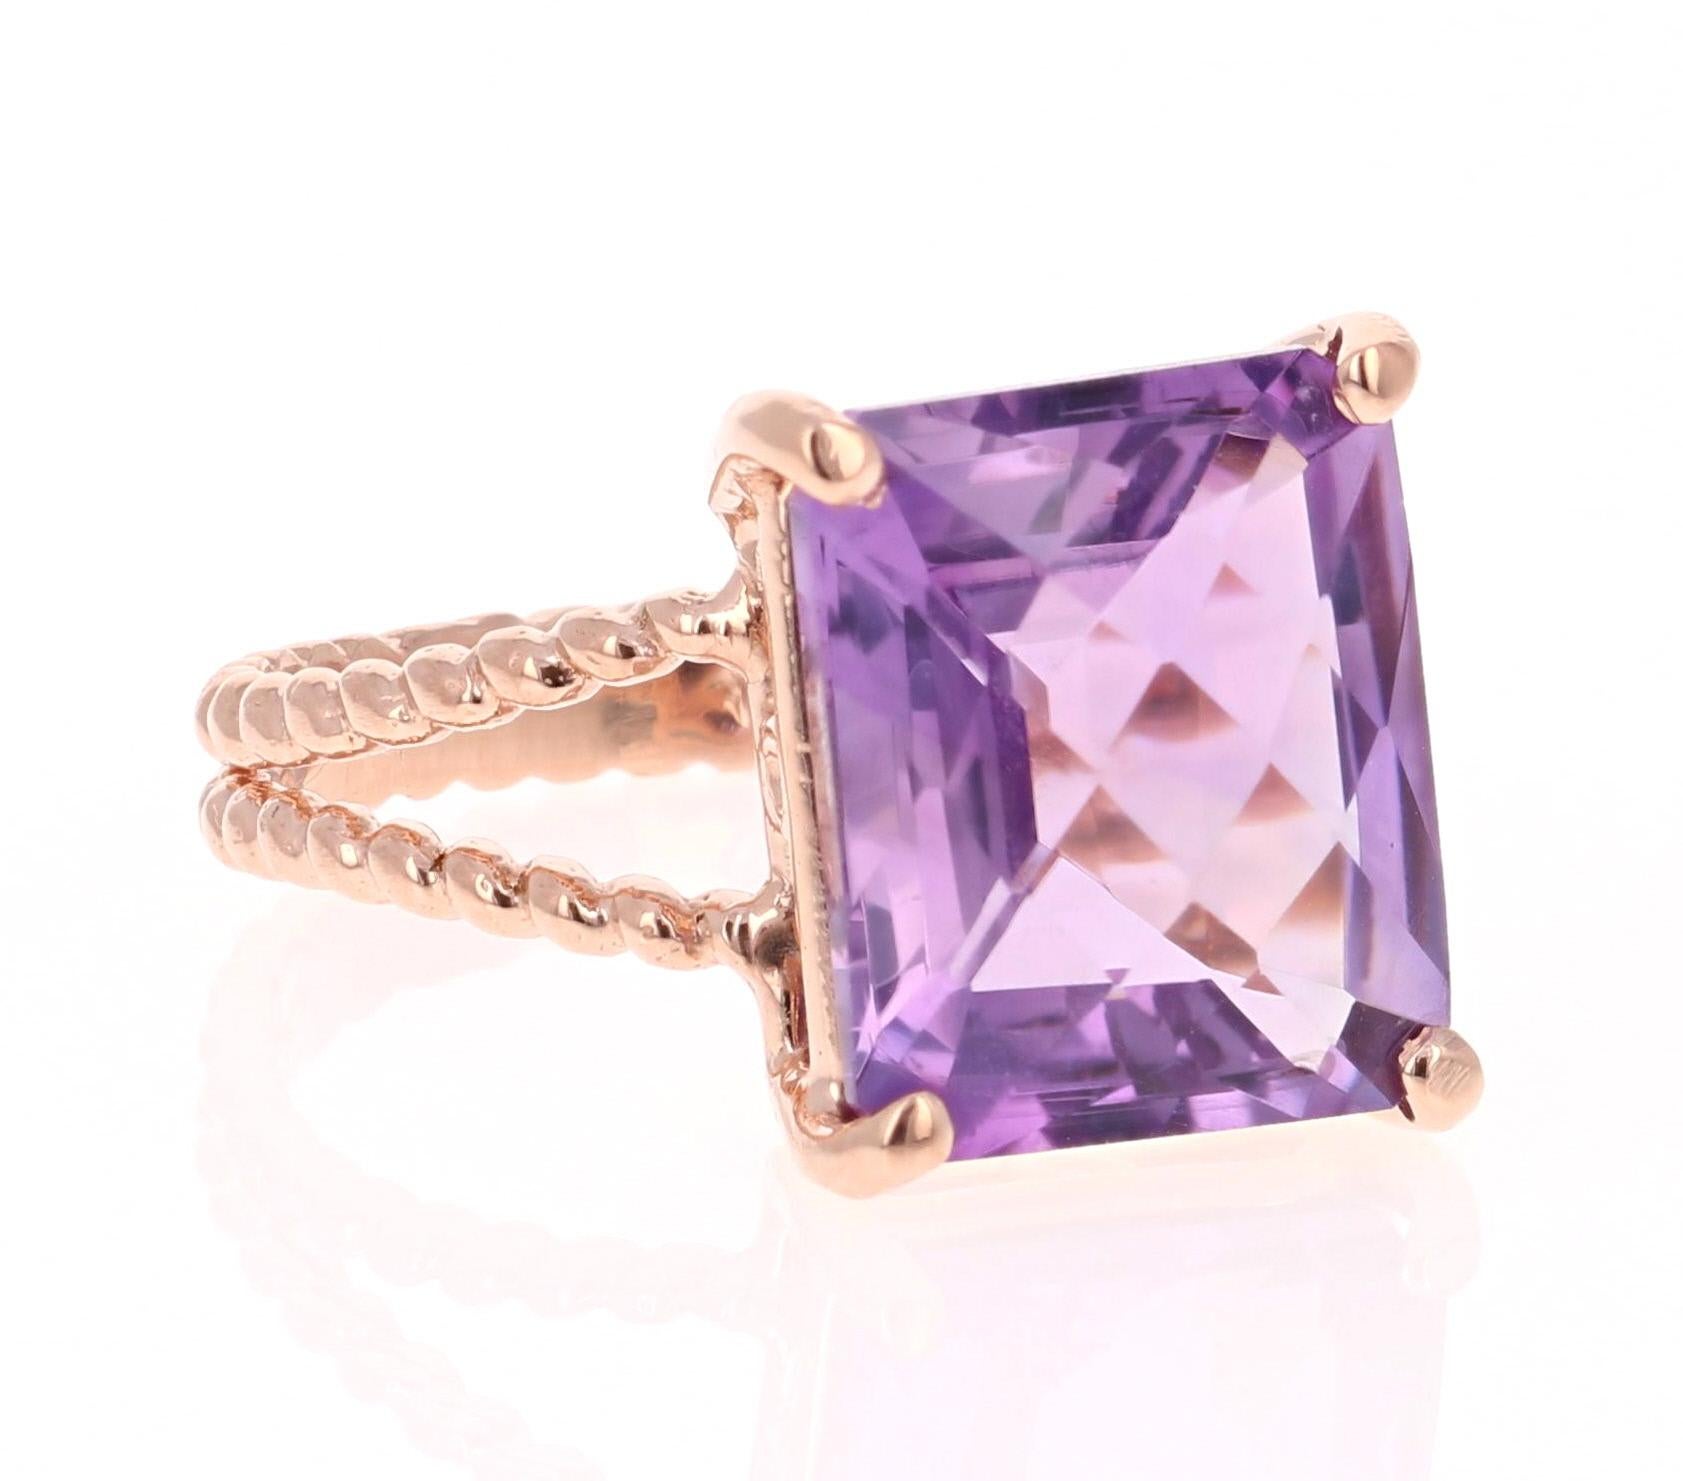 This beautiful and simple ring has a bright and vivid Emerald Cut Amethyst in the center that weighs 5.62 carats. 
The setting is beautifully crafted in 14K Rose Gold and weighs approximately 3.2 grams.
The ring is a size 7 and can be re-sized if